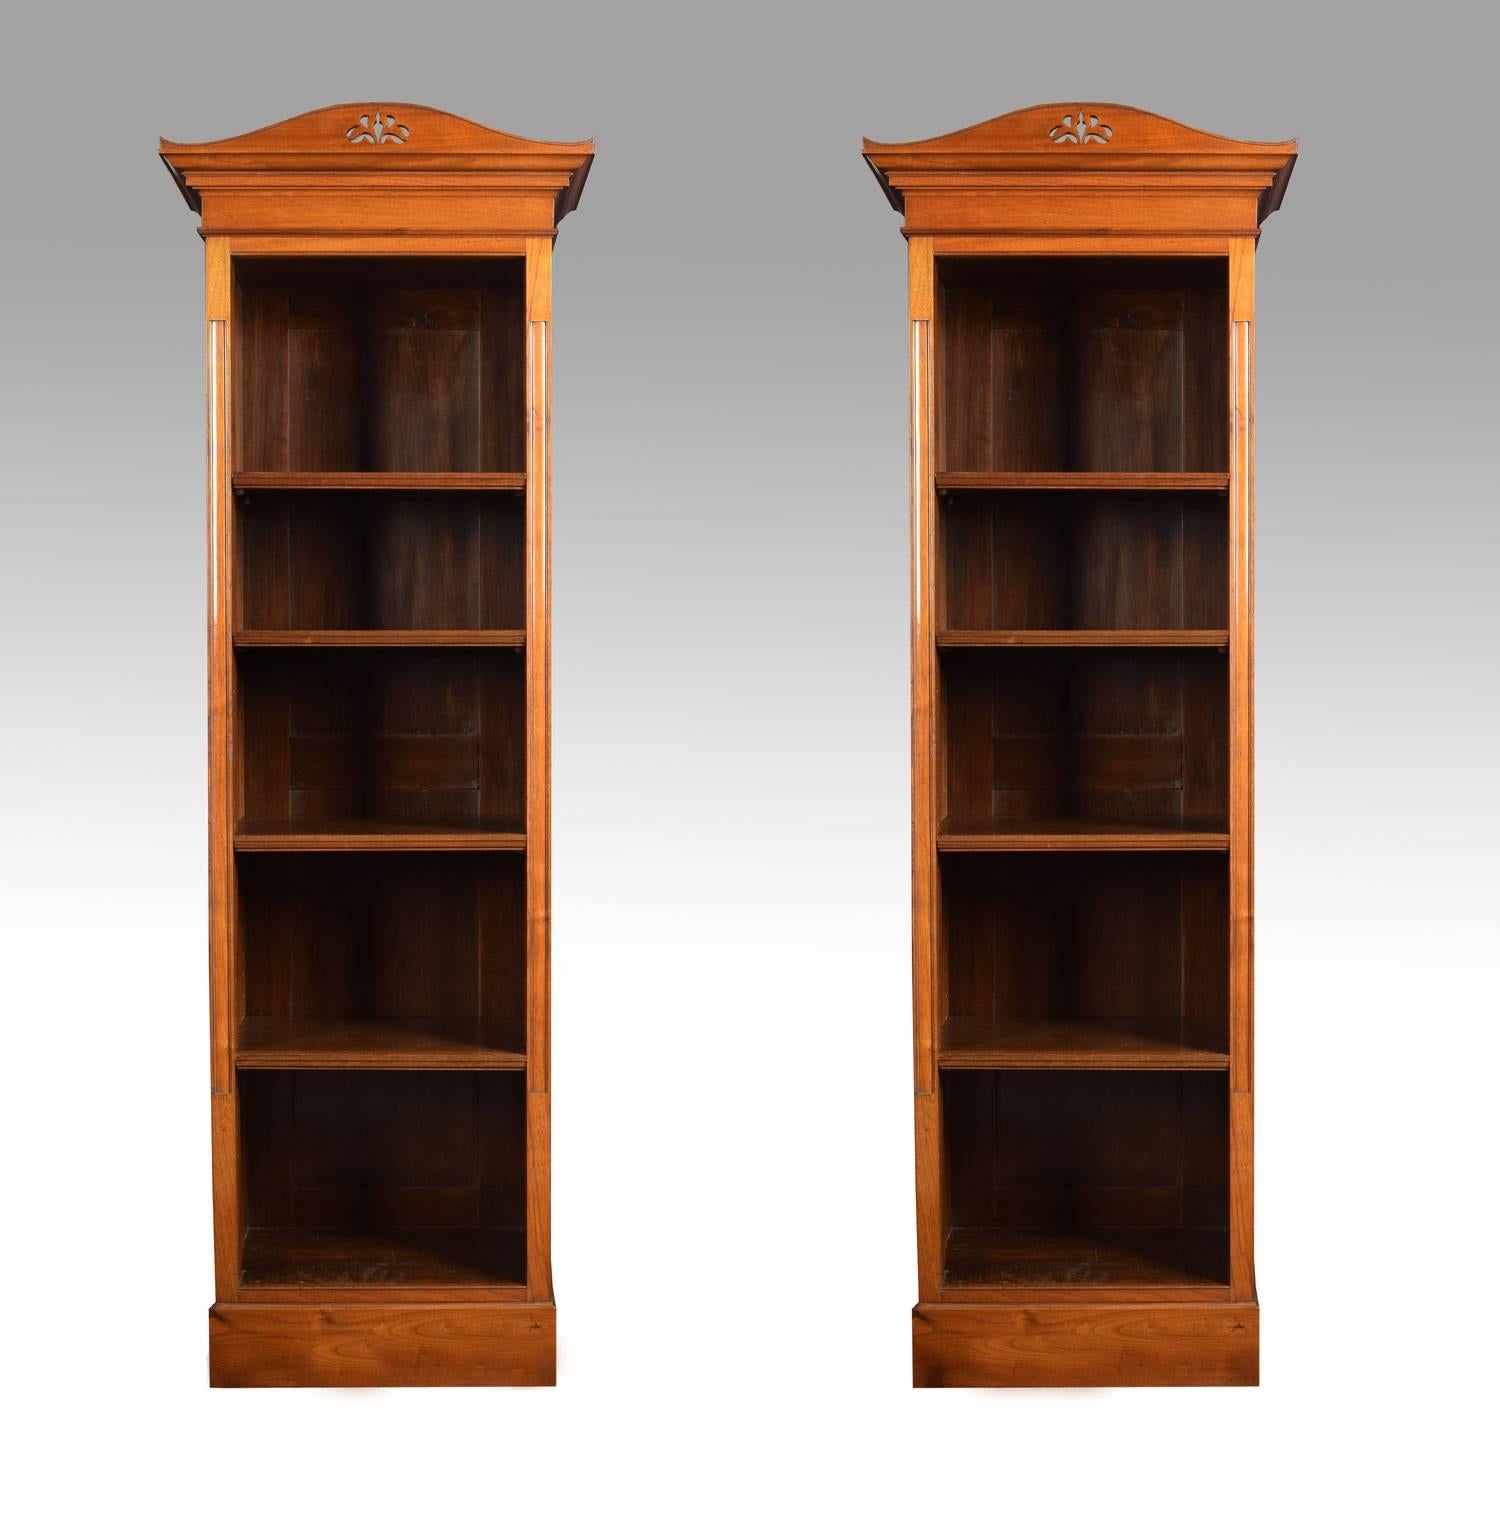 Pair of walnut narrow open bookcases, the top section having pierced cornice above four adjustable shelves, flanked by moulded columns. All raised up on plinth base.

Height 71.5 inches.

Width 23.5 inches.

Dept 14.5 inches.